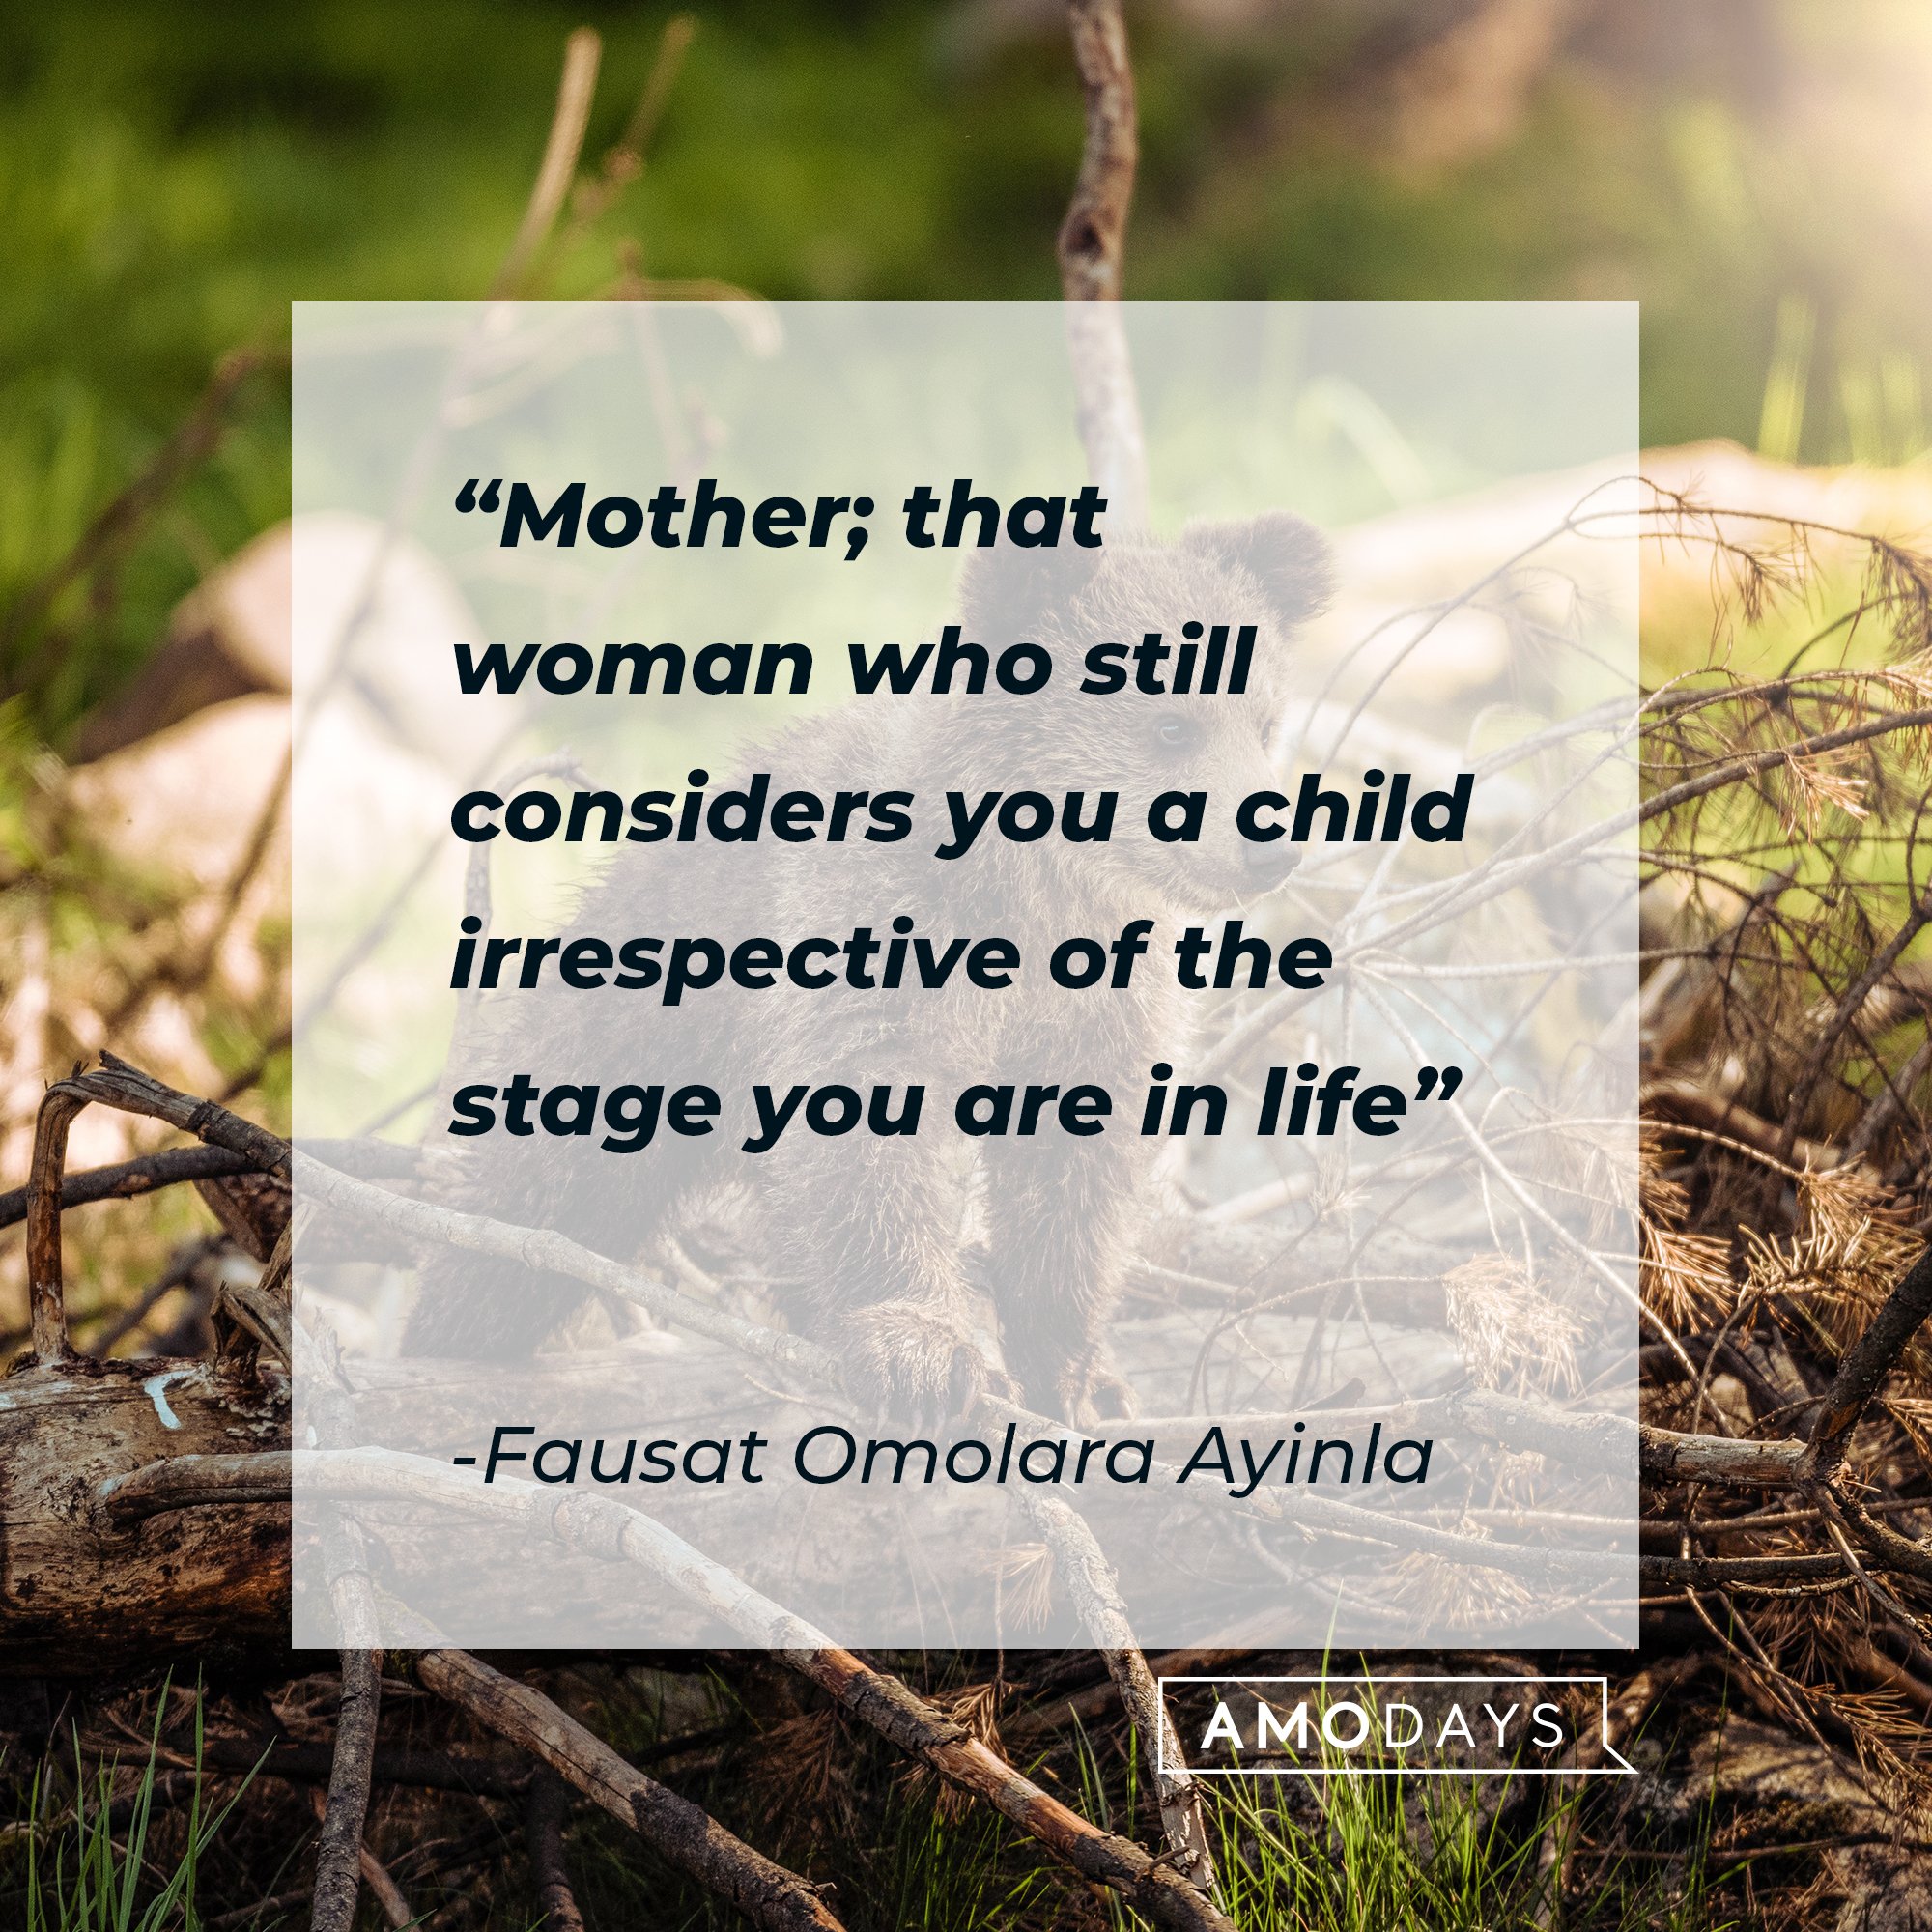 Fausat Omolara Ayinla's quote: "Mother; that woman who still considers you a child irrespective of the stage you are in life." | Image: AmoDays